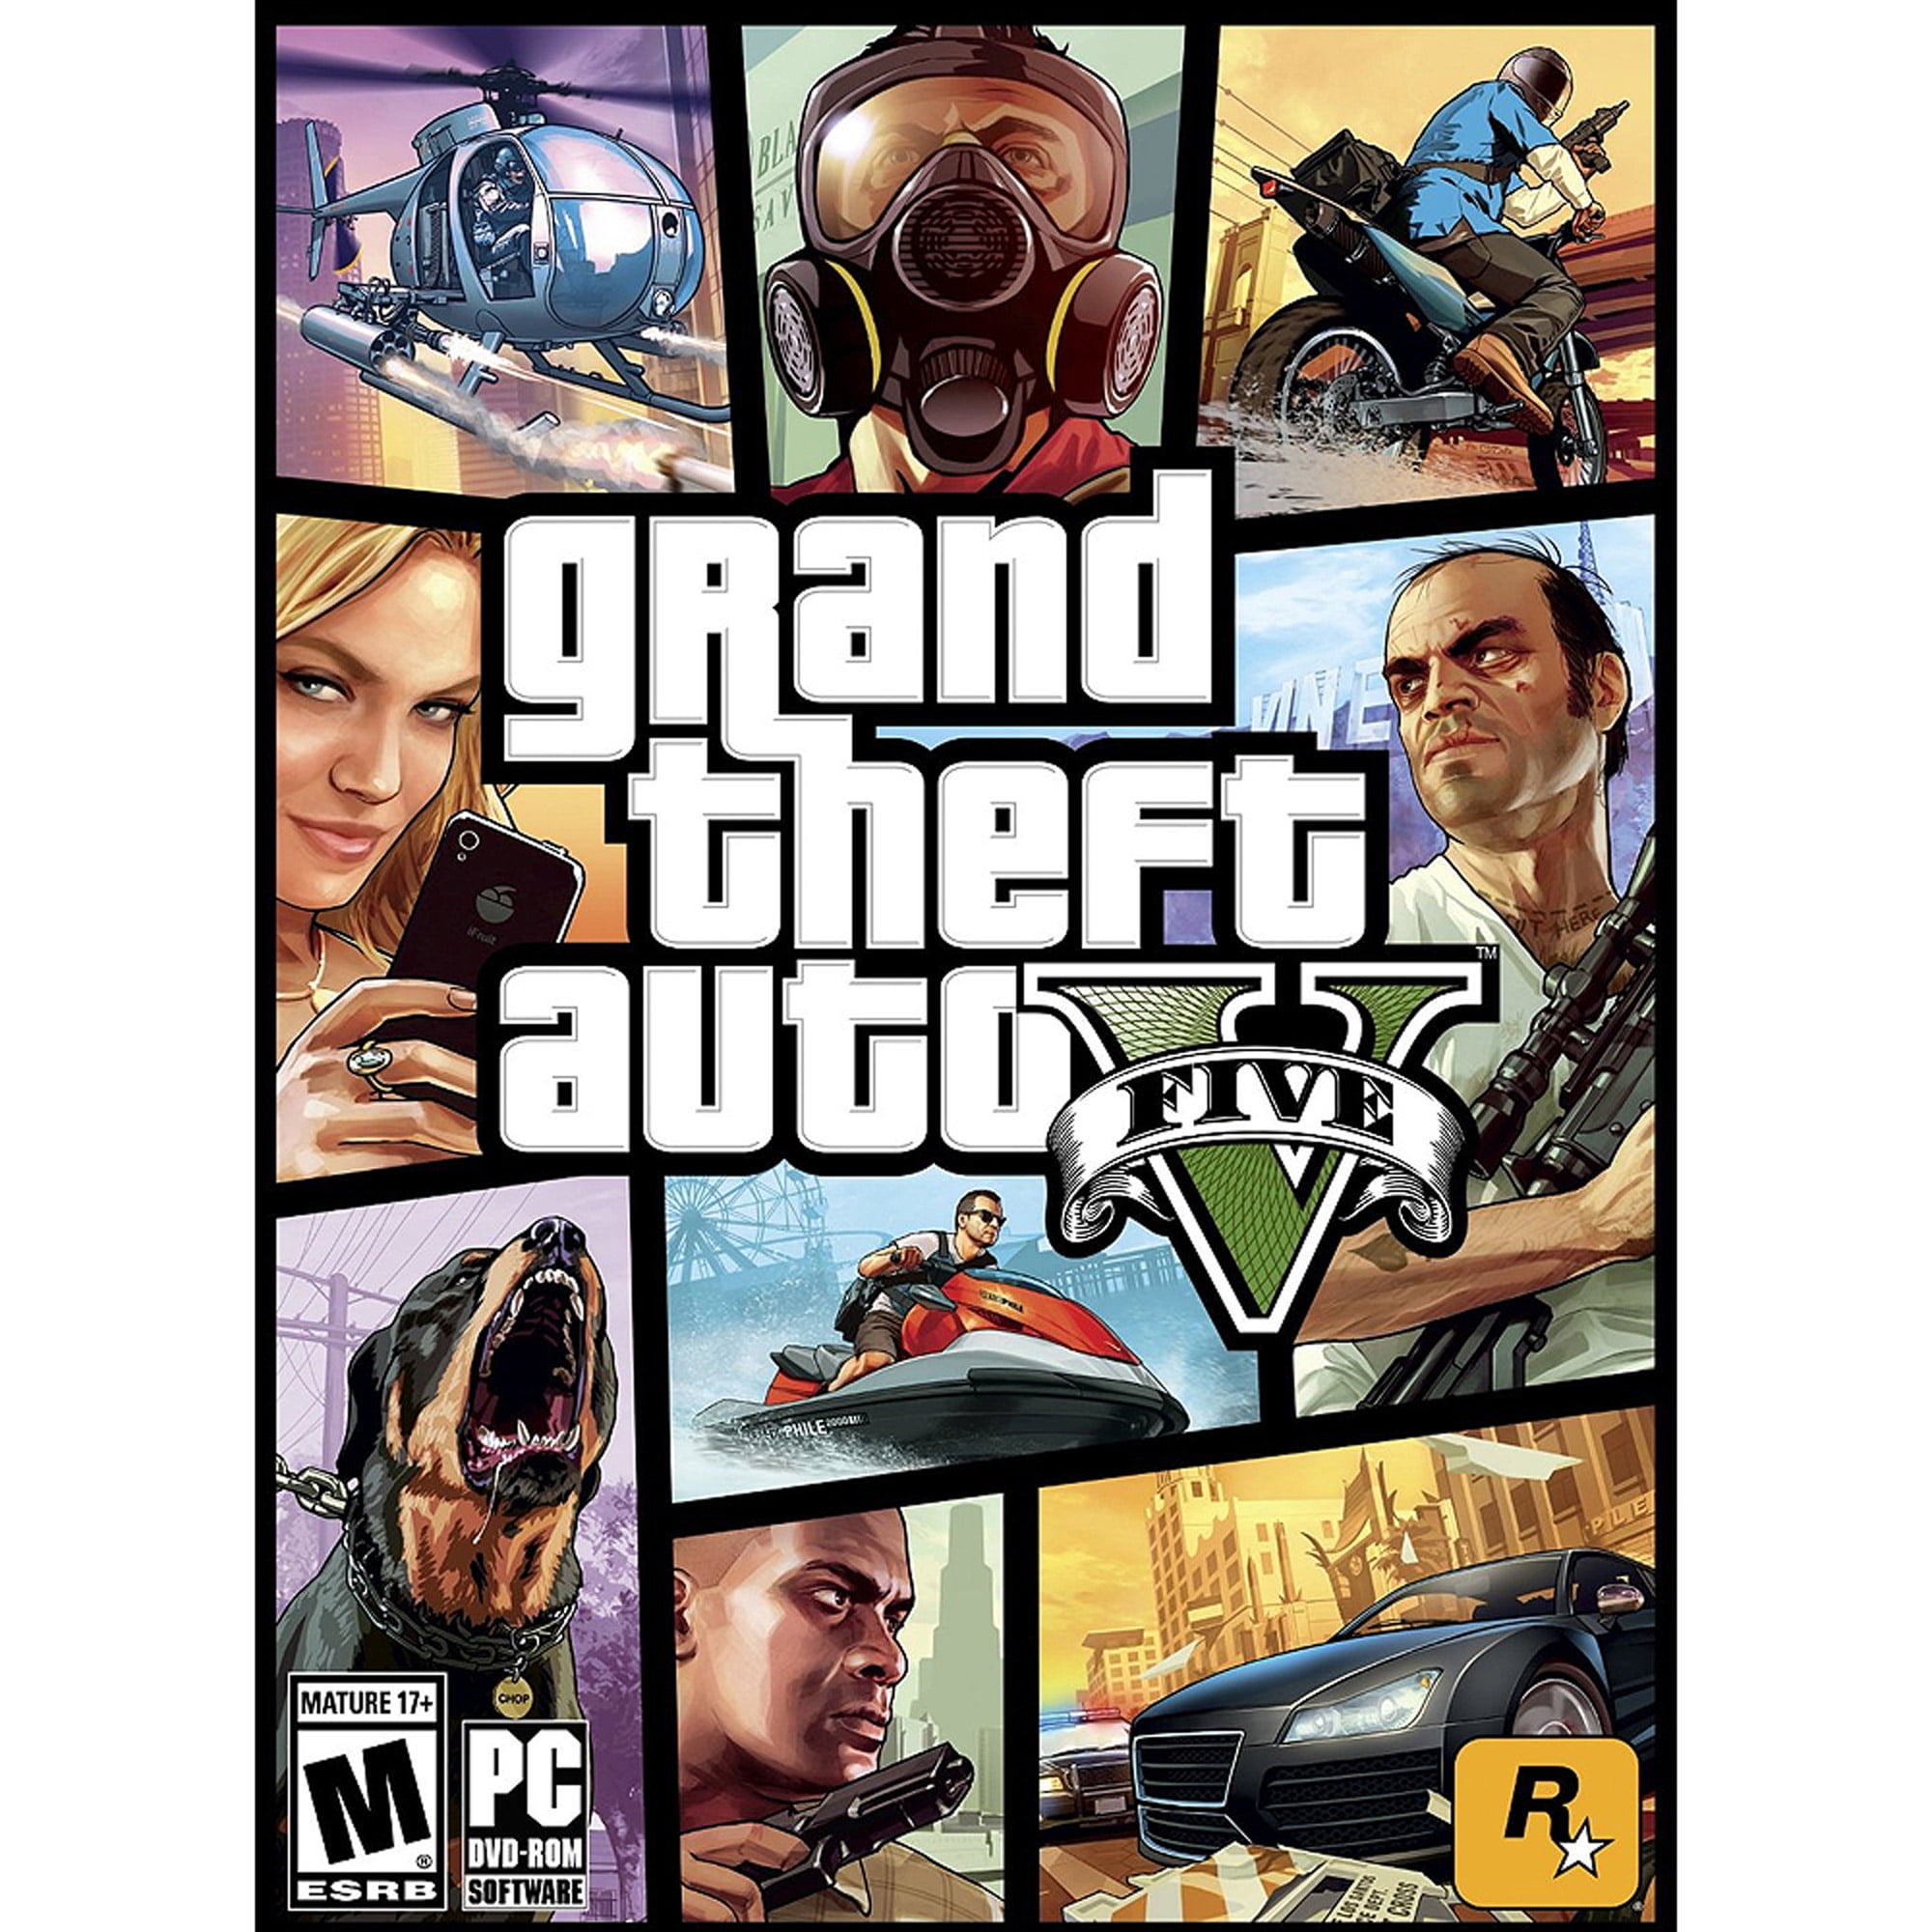 Grand Theft Auto V GTA 5 PC And Laptop Game in Central Business District -  Video Games, Humble Gamer